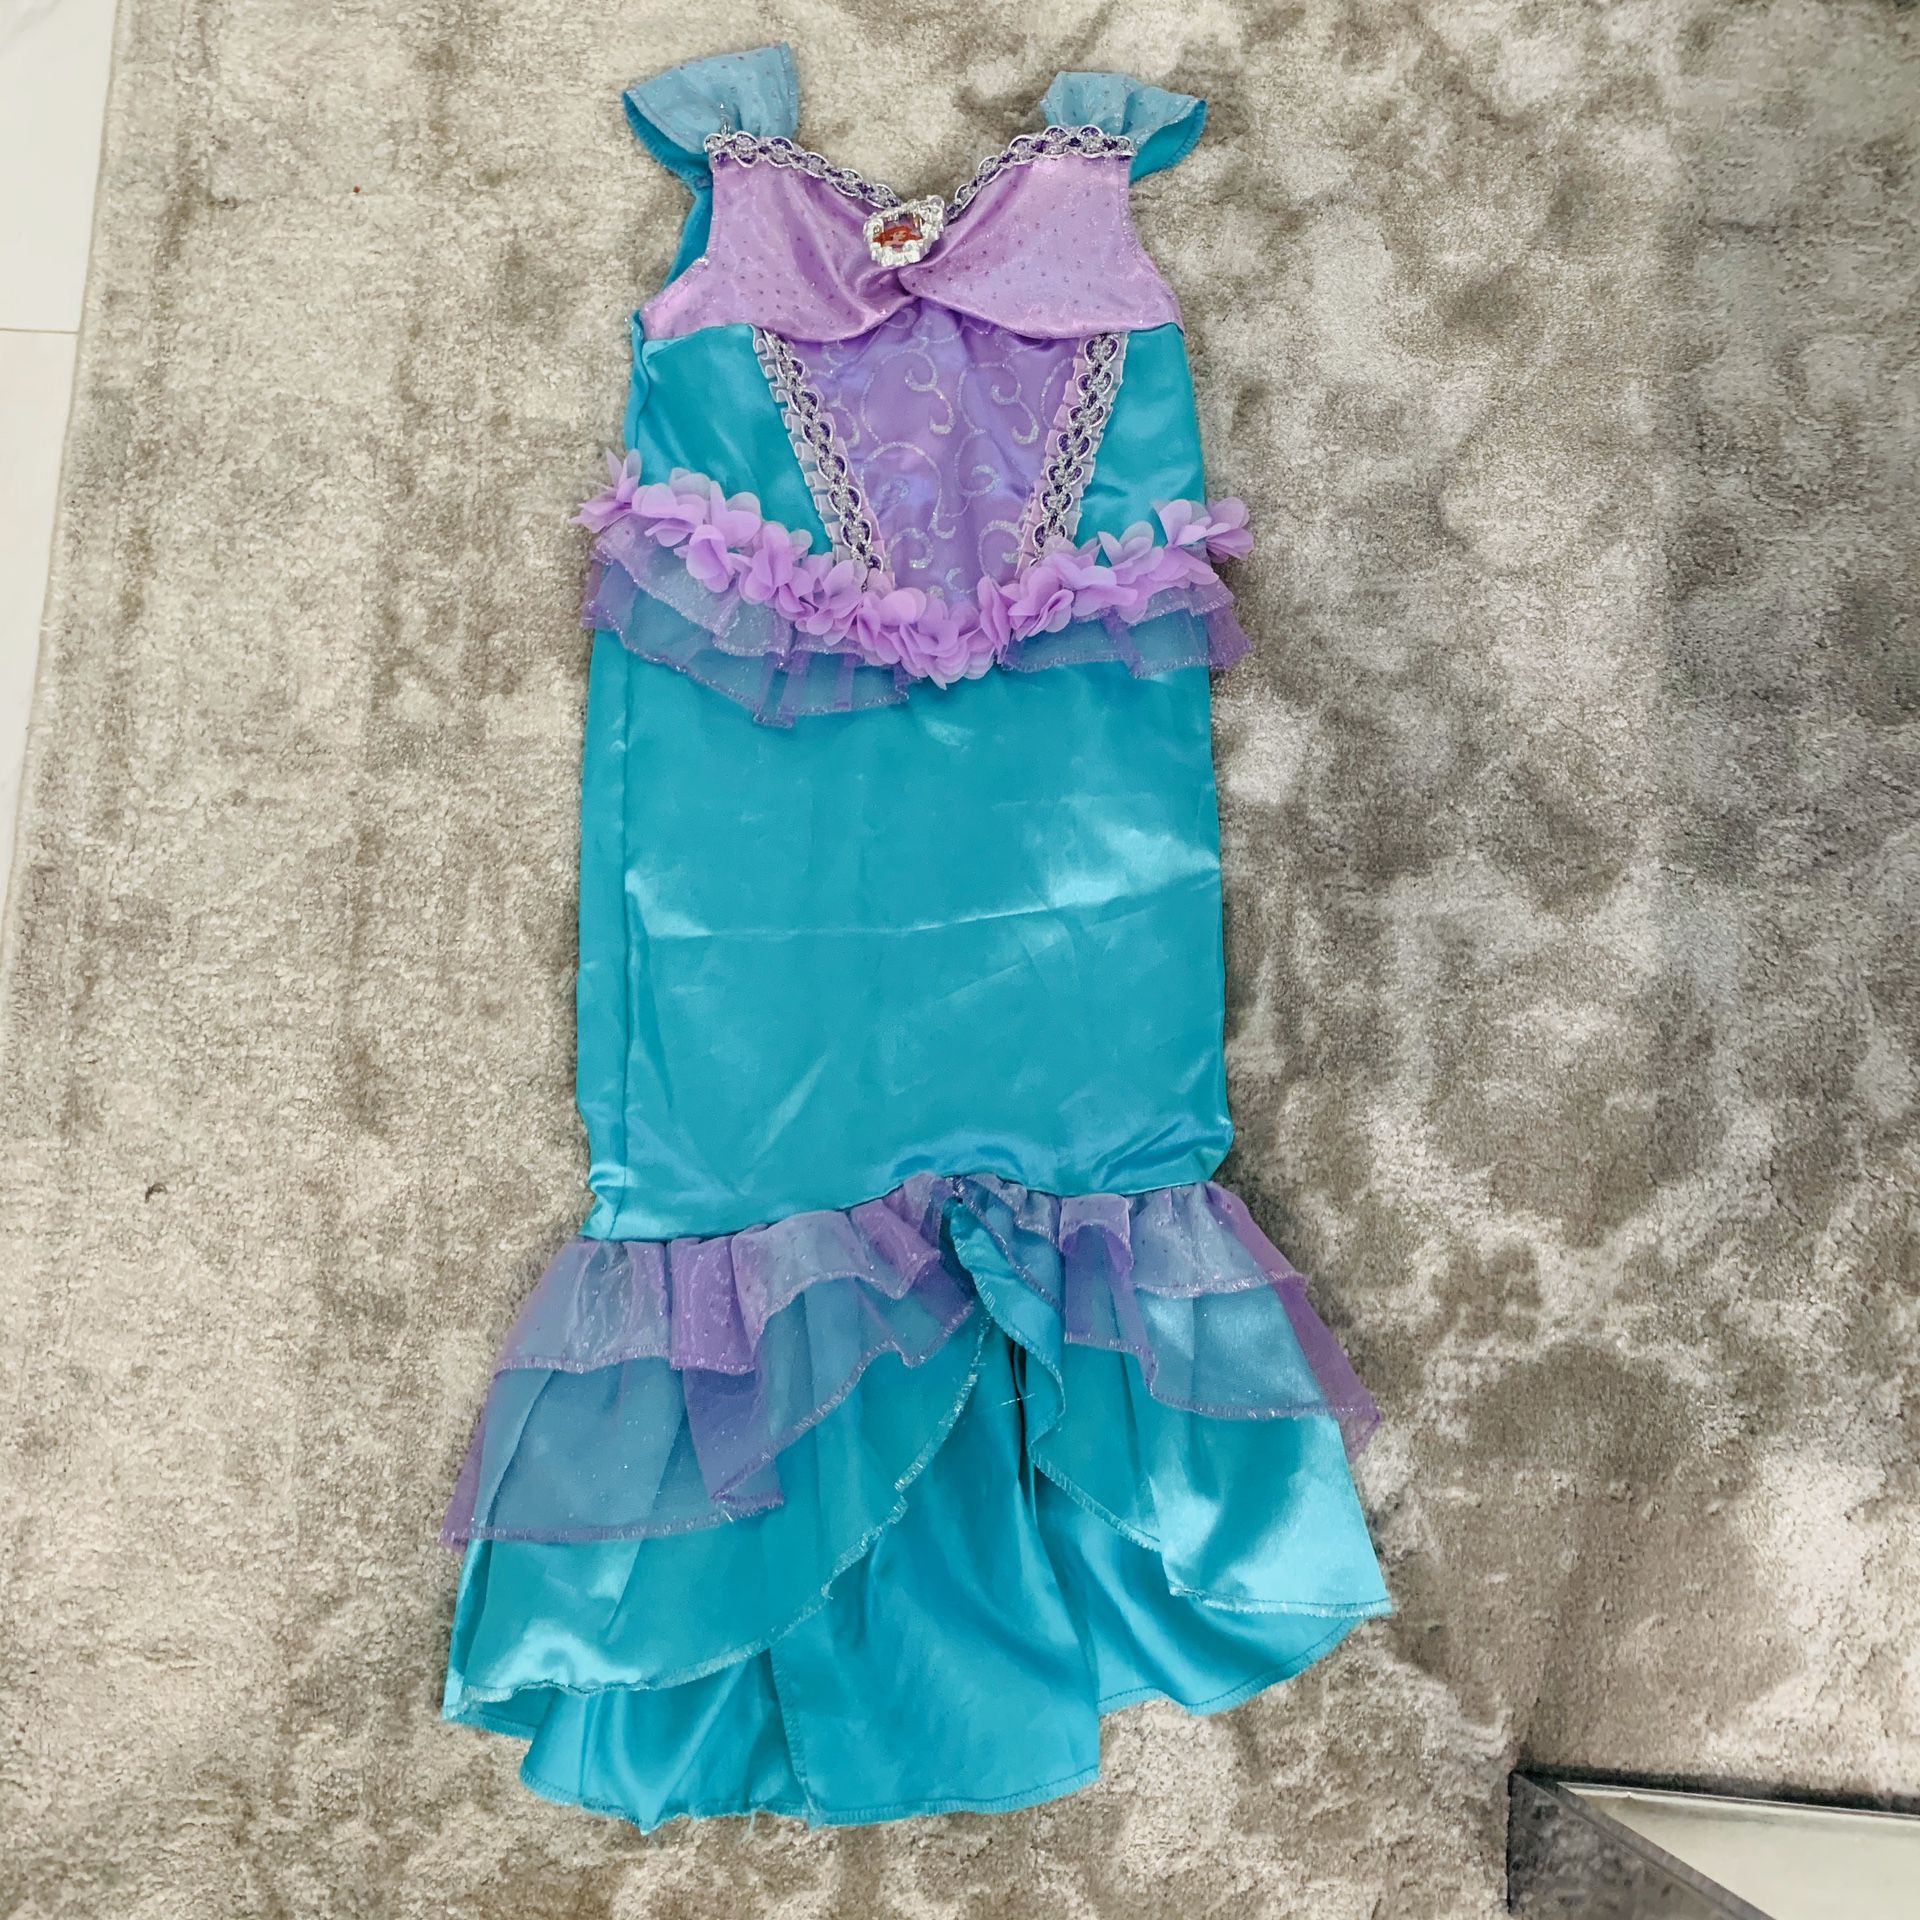 Disney Princess Ariel Little Mermaid Classic Toddler Child Costume Used One Time